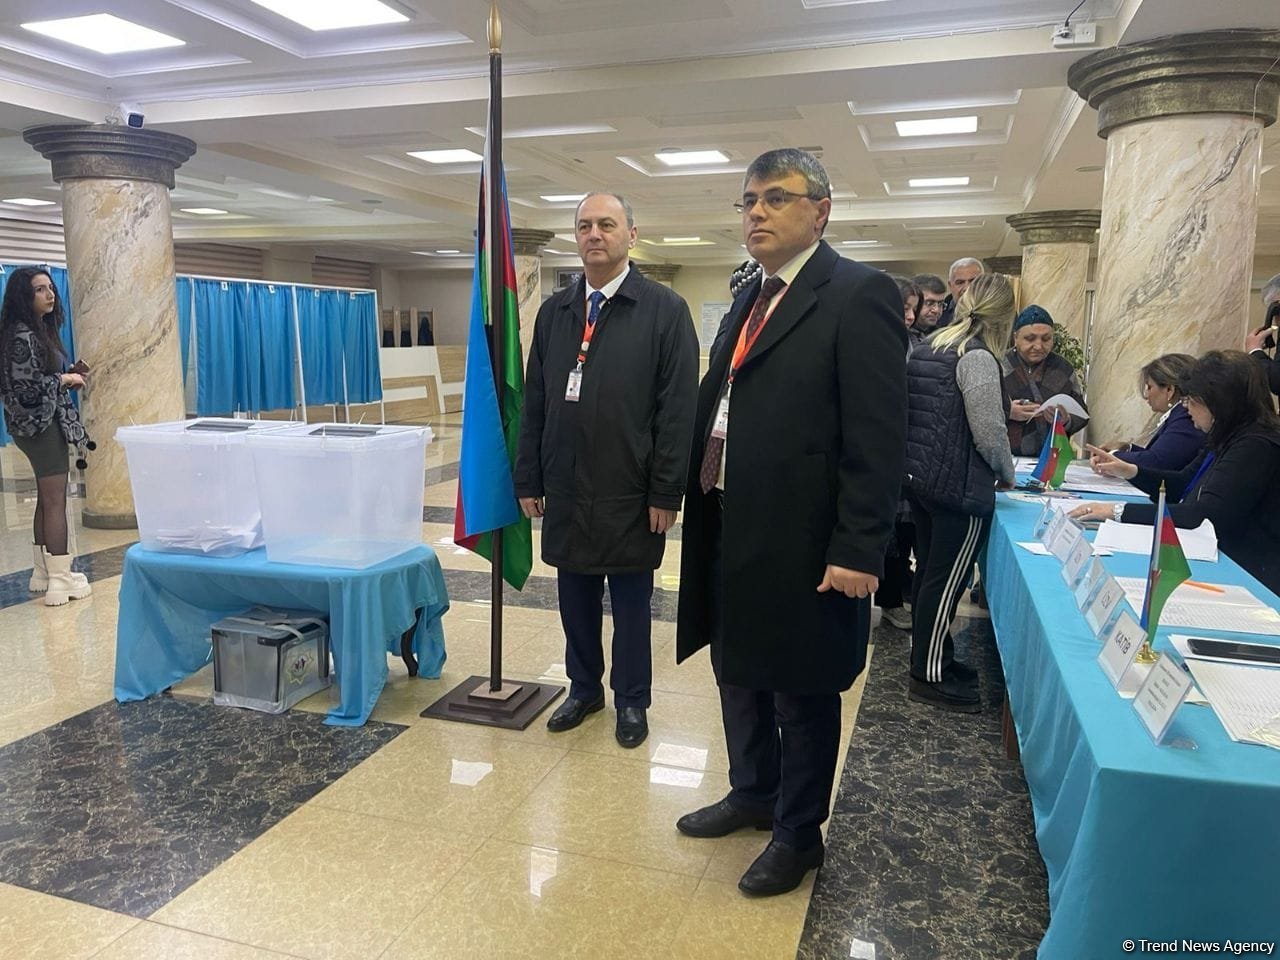 Azerbaijan shows very high voter activity compared to other countries - Tajik observer